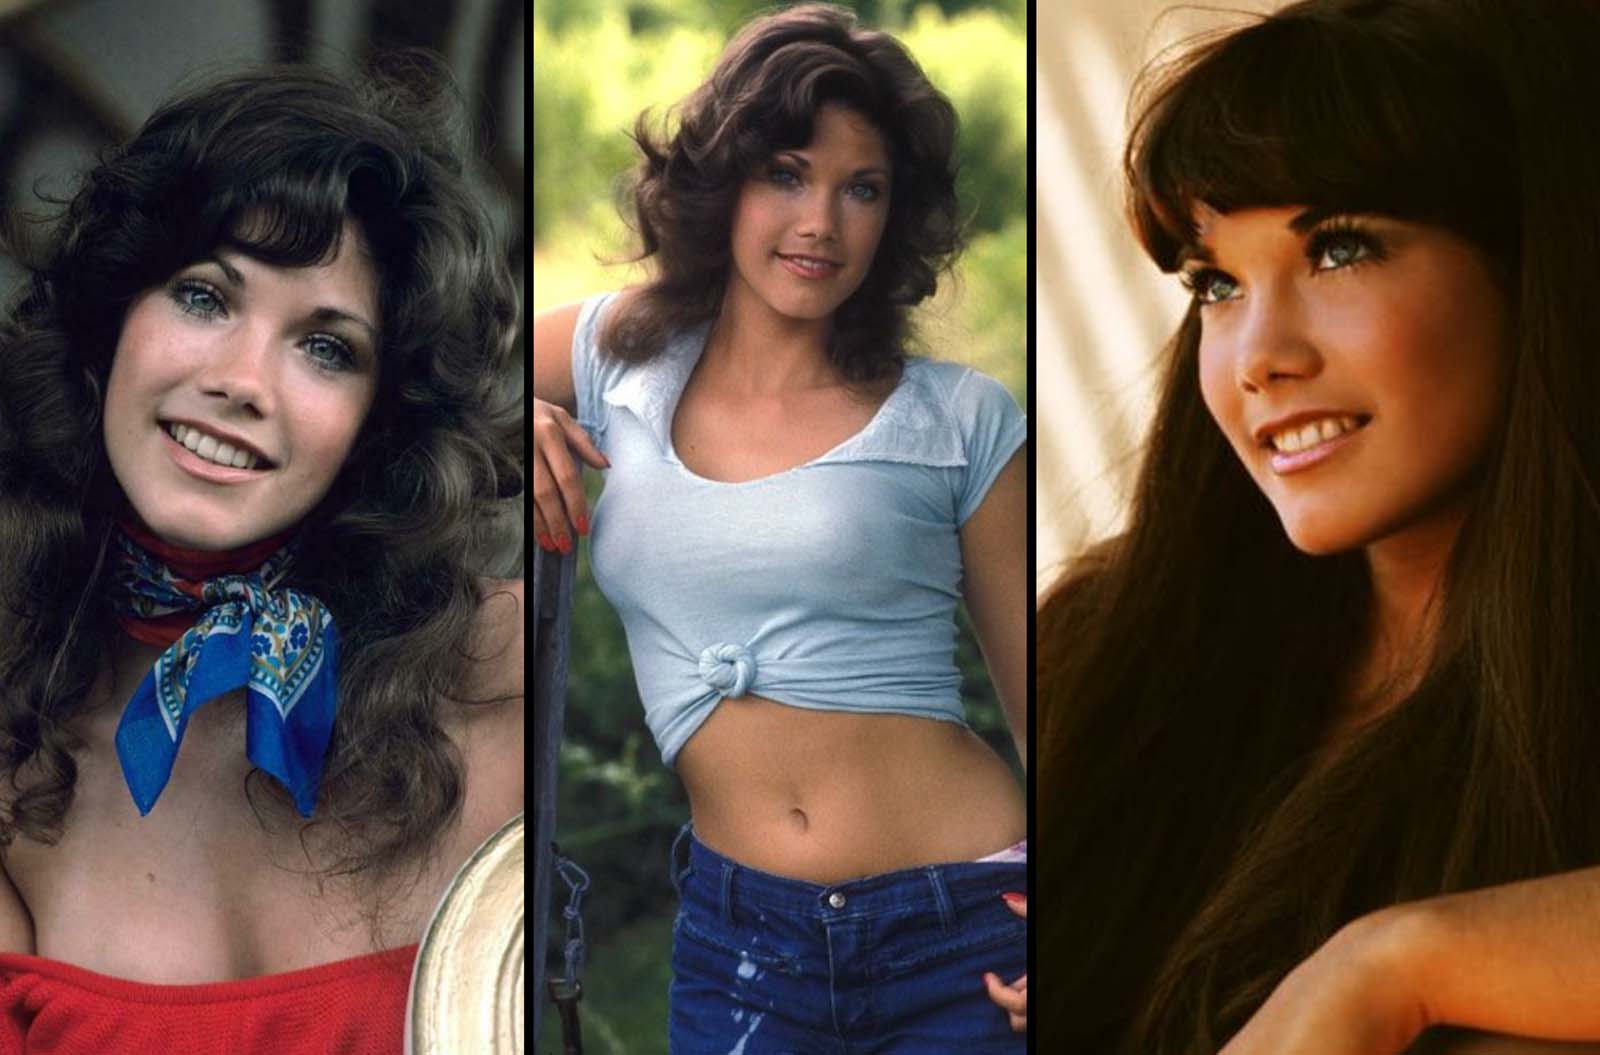 colin persson recommends Pictures Of Barbi Benton